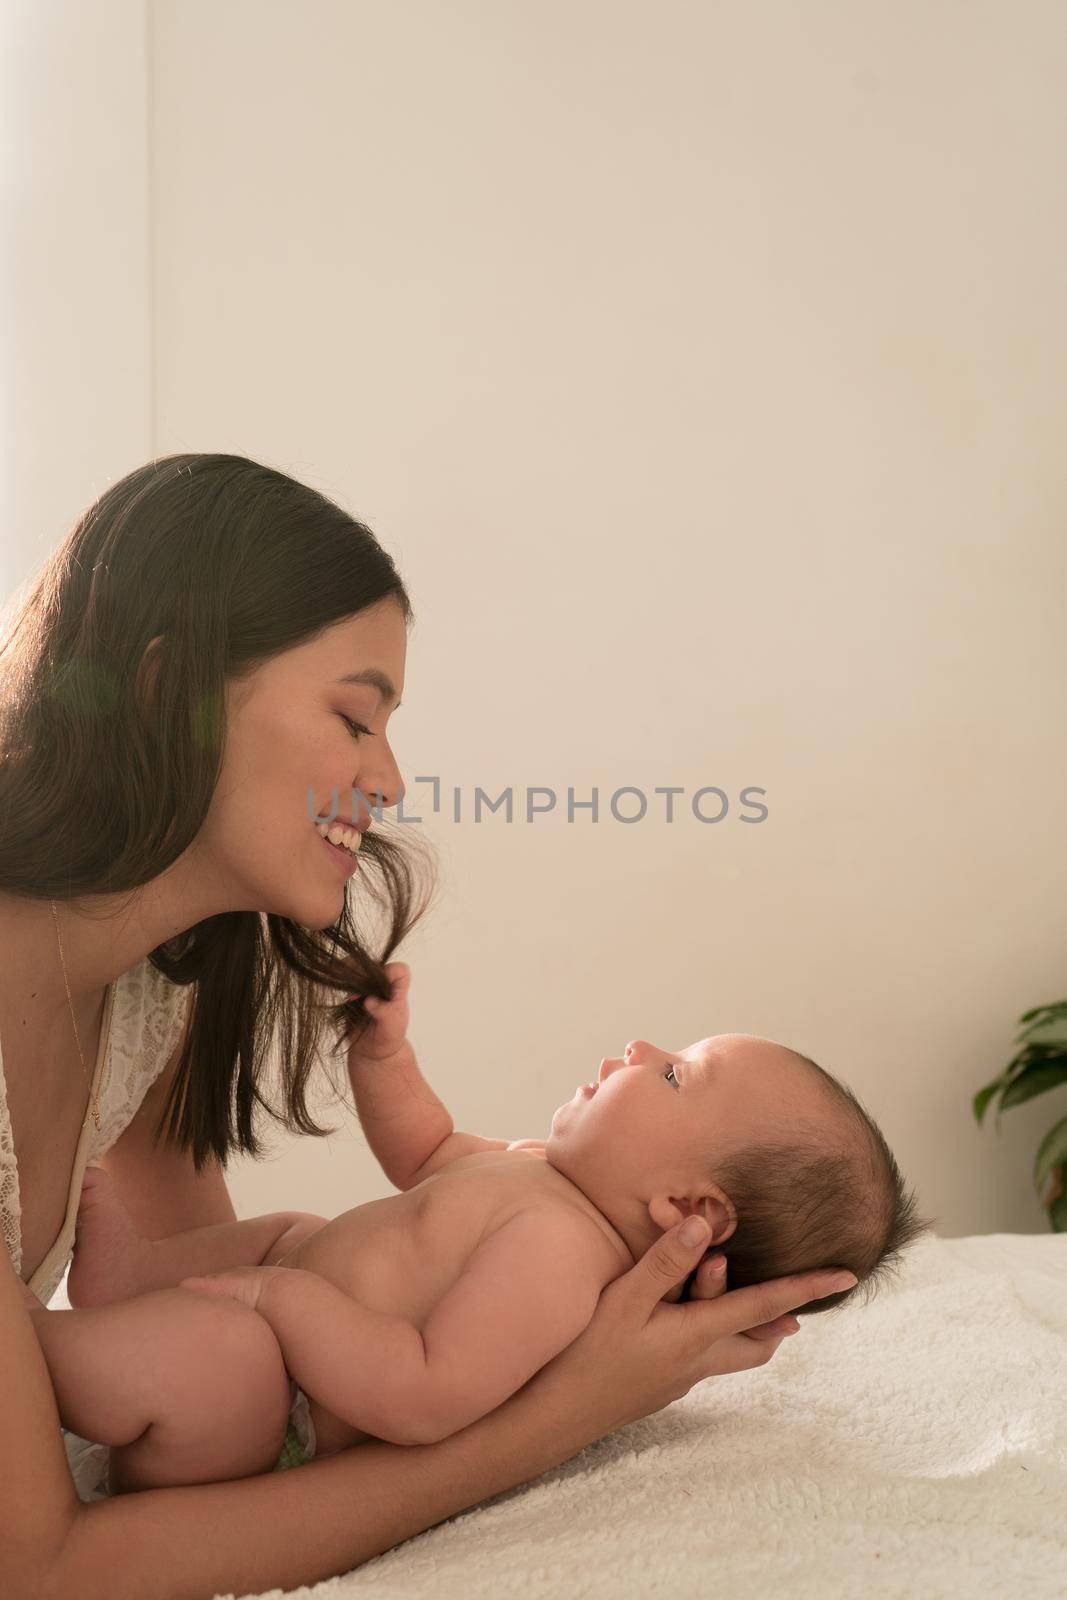 Latin young mother love play happy with baby on the bed at home. High quality photo vertical photo style life